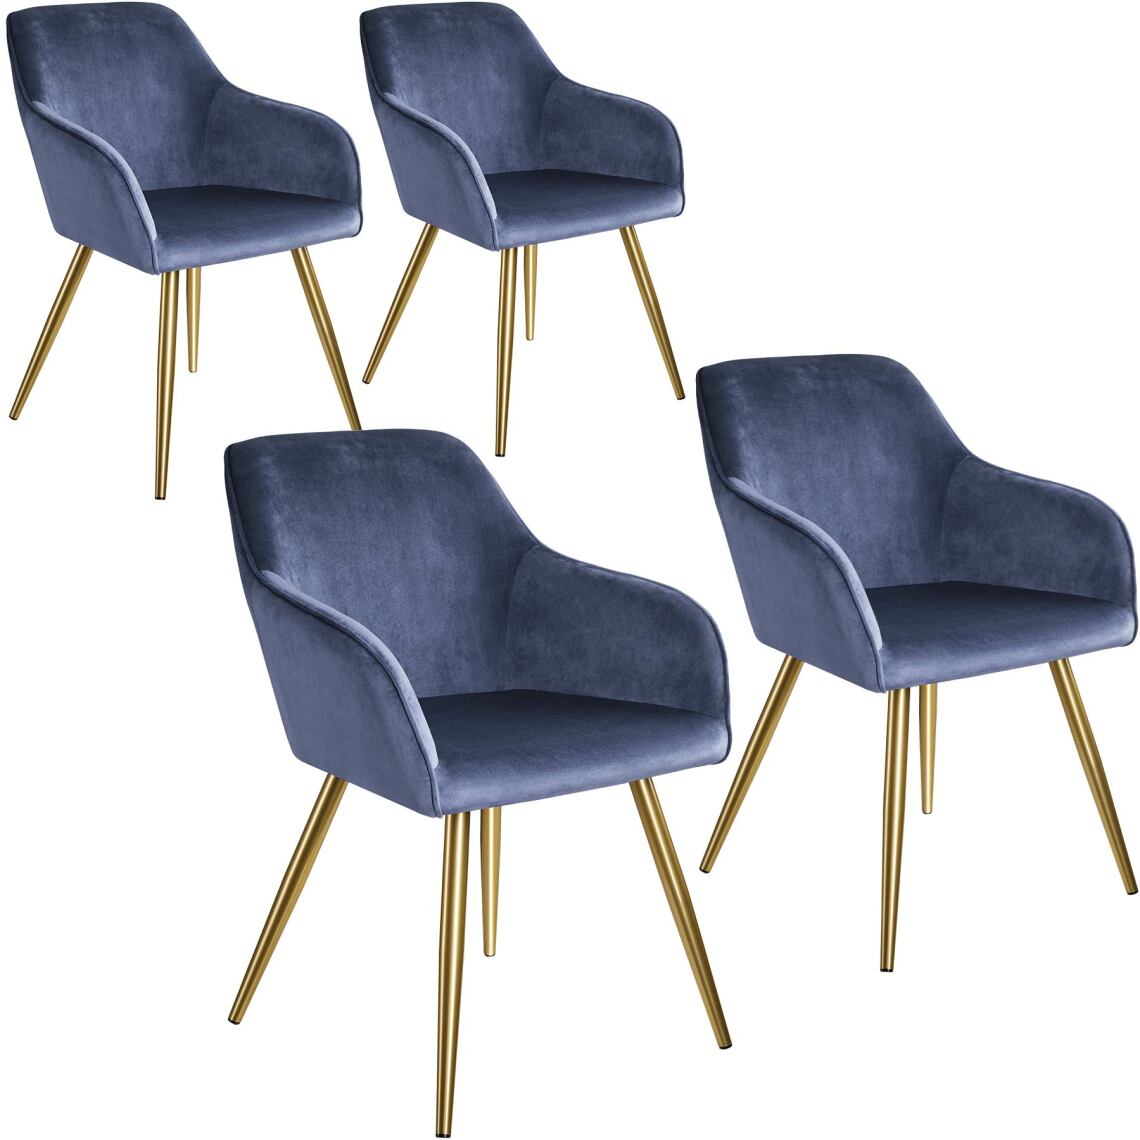 Tectake - 4 Chaises MARILYN Effet Velours Style Scandinave - bleu/or - Chaises